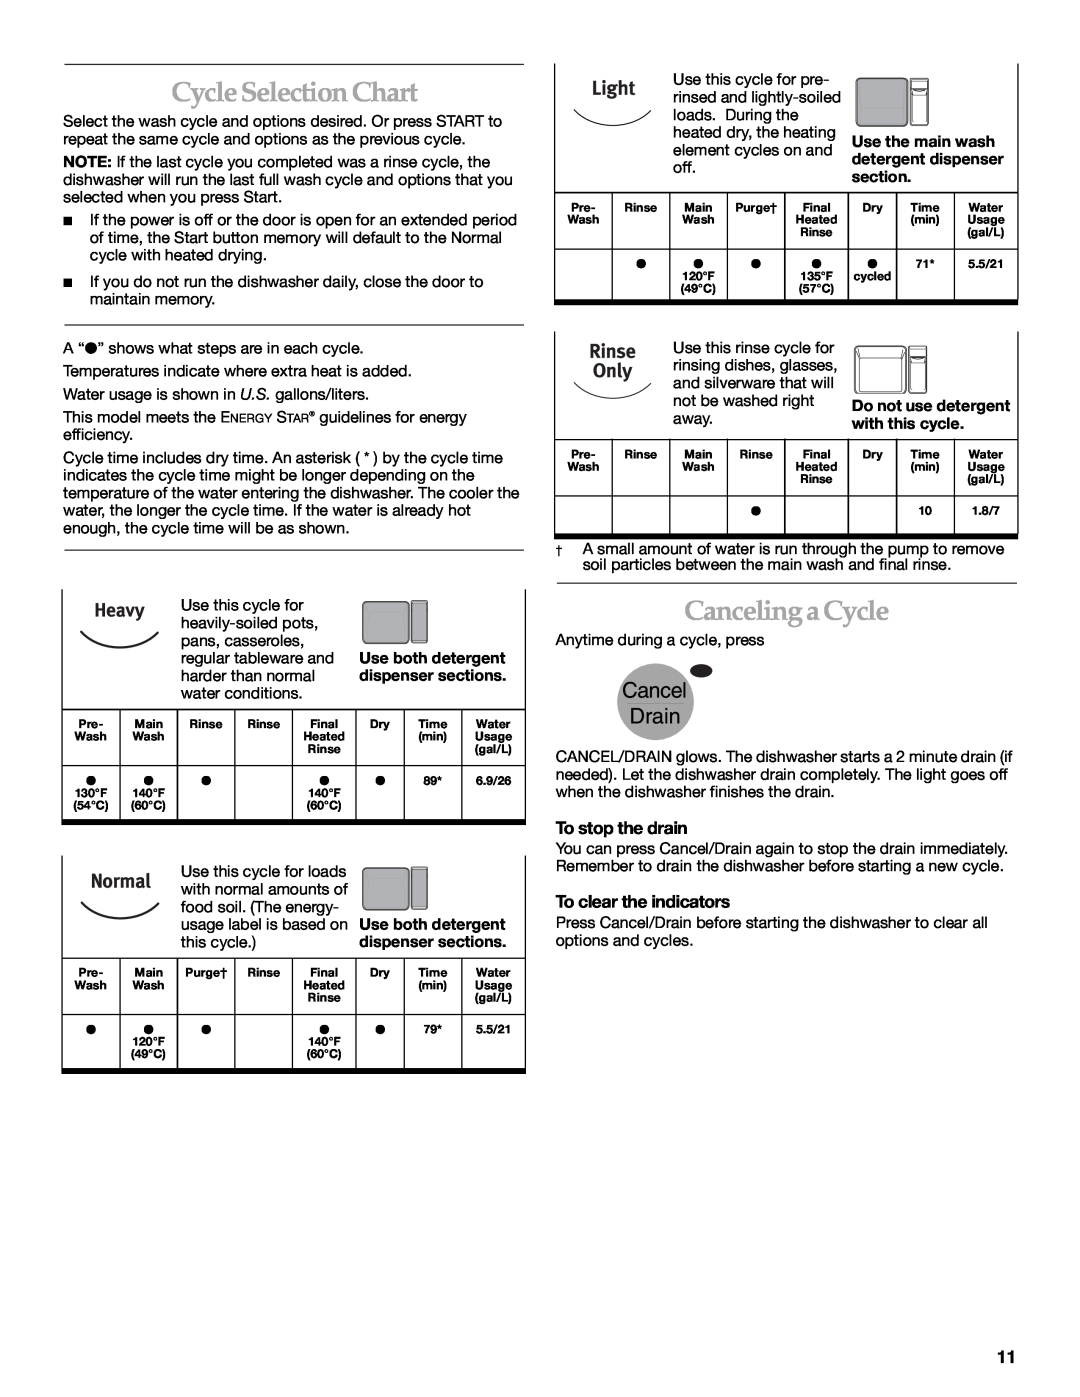 KitchenAid KUDM01TJ manual Cycle Selection Chart, Canceling a Cycle, To stop the drain, To clear the indicators 